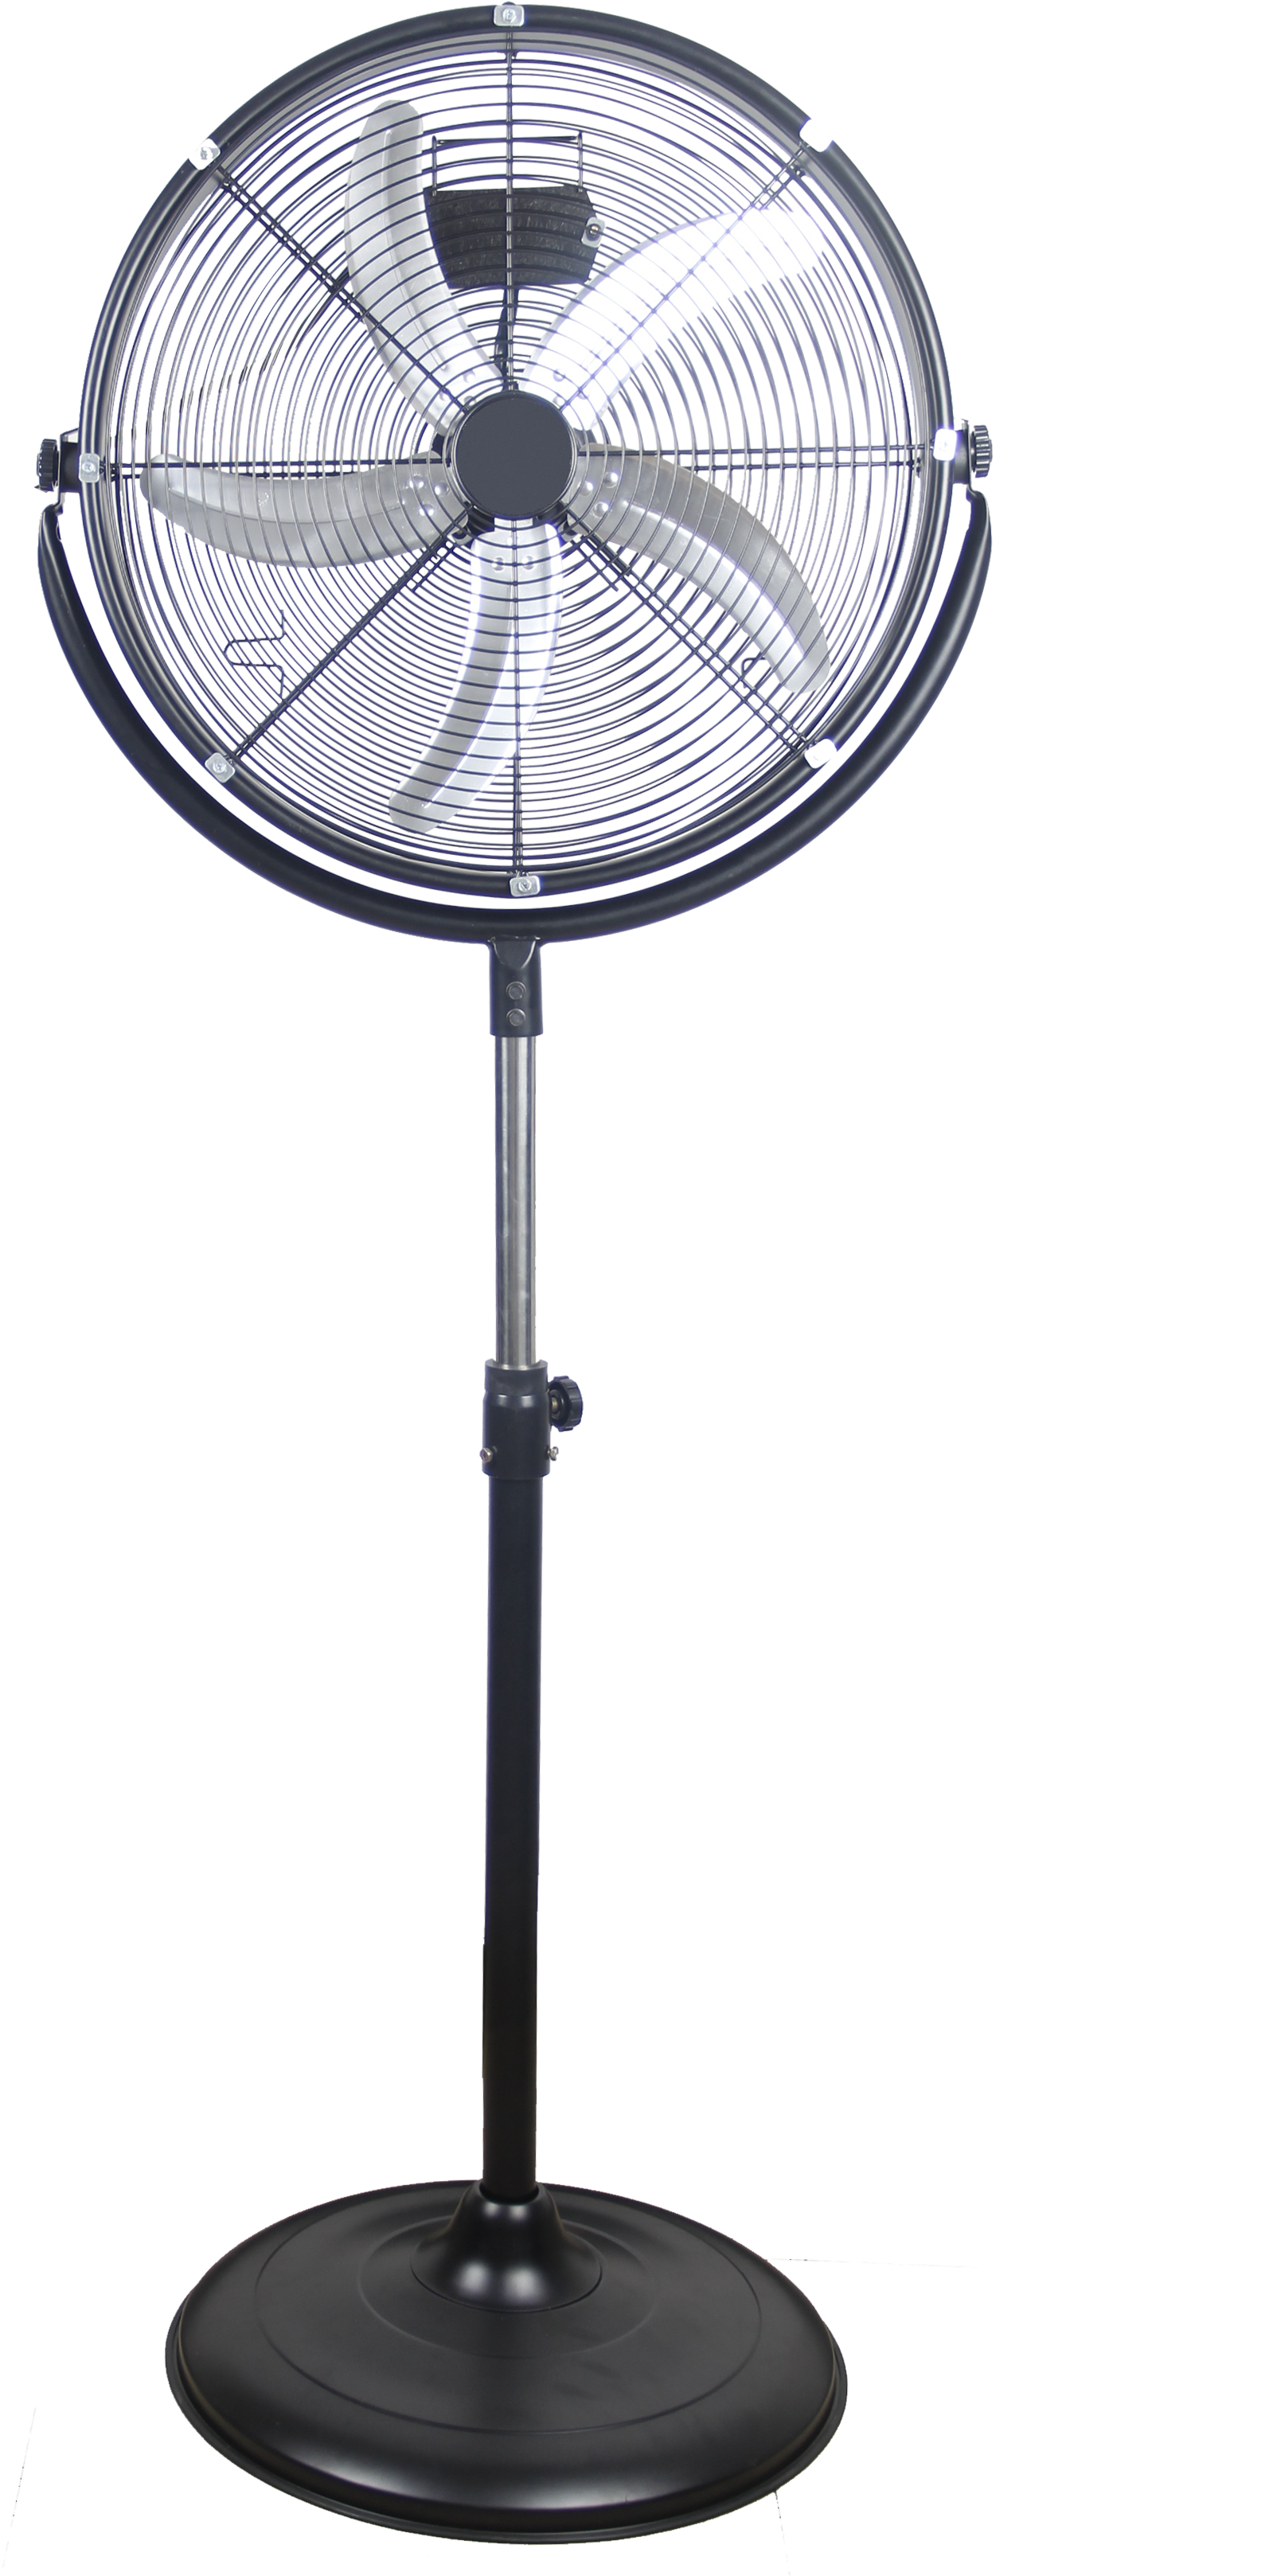 20" High Velocity Pedestal Fan Vf-20pmc 3 Speed Blade - Polar-aire 20" Excessive Velocity Pedistal Fan (vf-20pmc) (2552x3456), Png Download